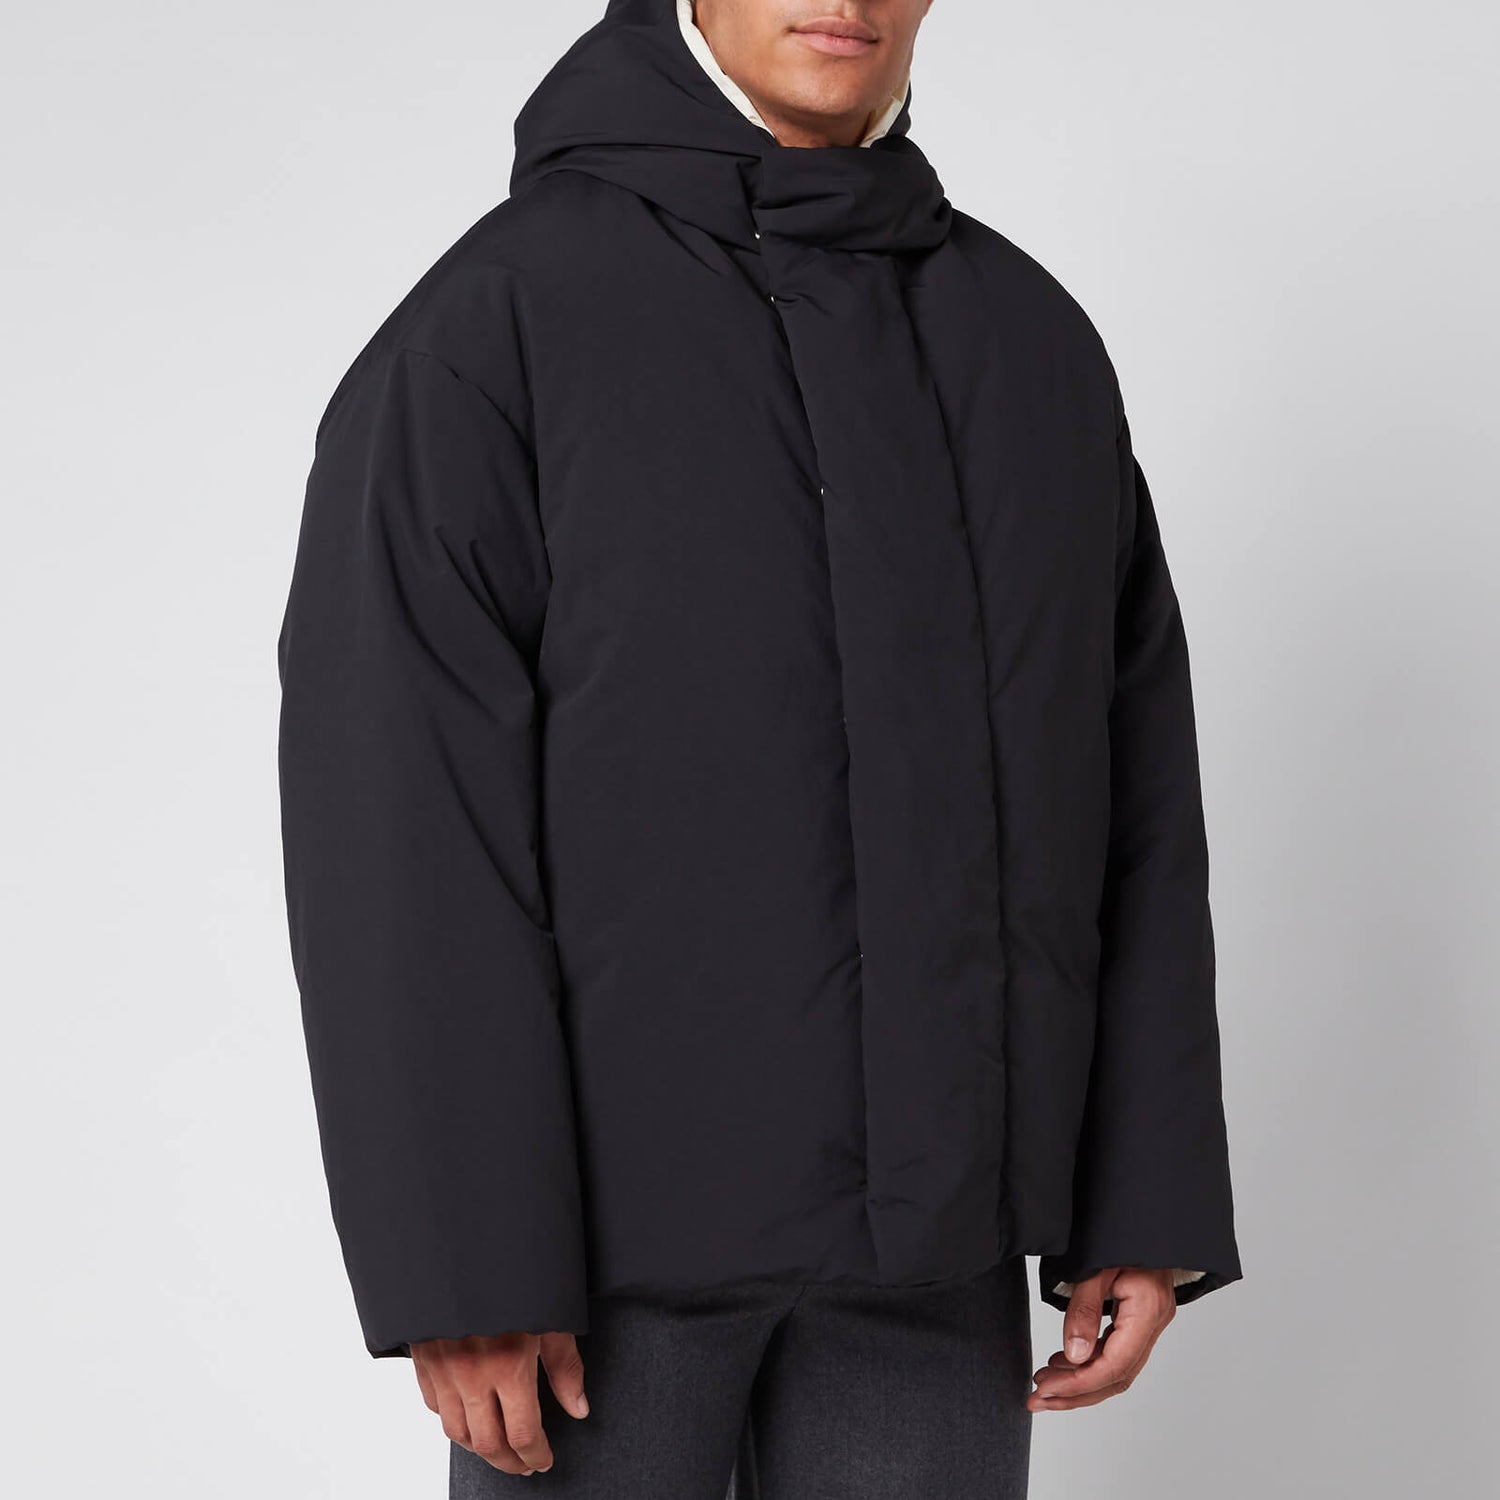 OAMC Men's Lithium Jacket - Black - Free UK Delivery Available